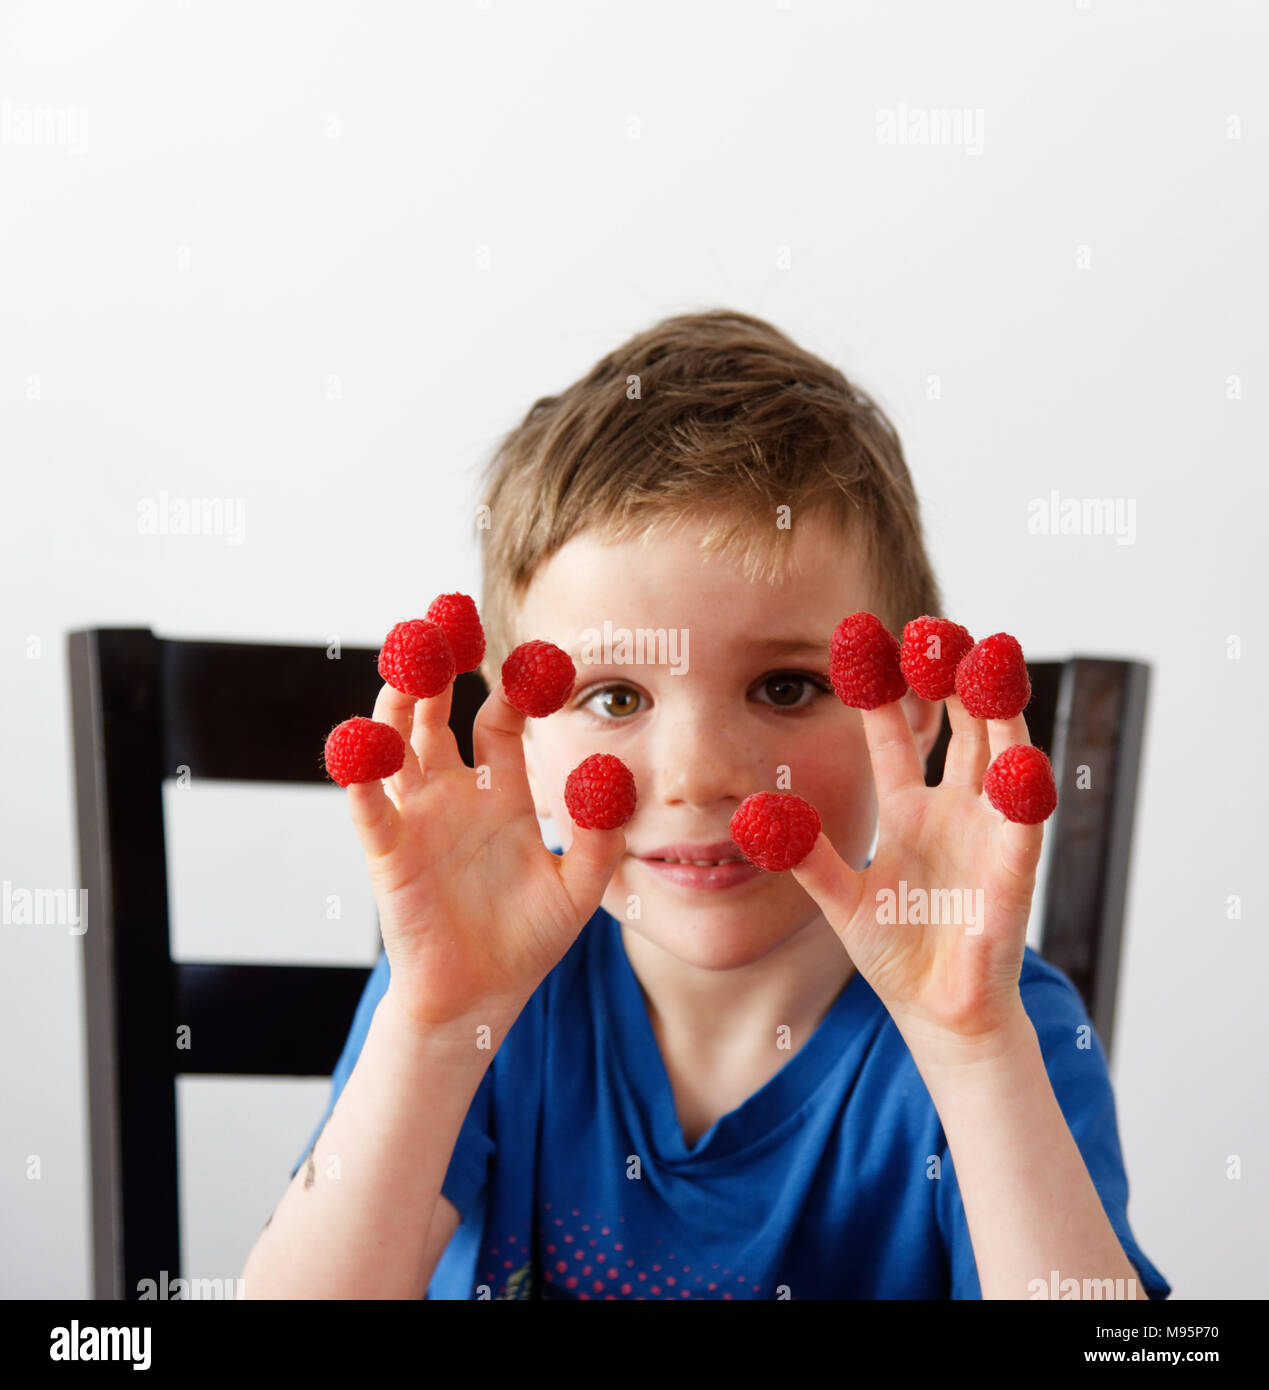 A little boy (5 yrs old) with raspberries on his fingers Stock Photo